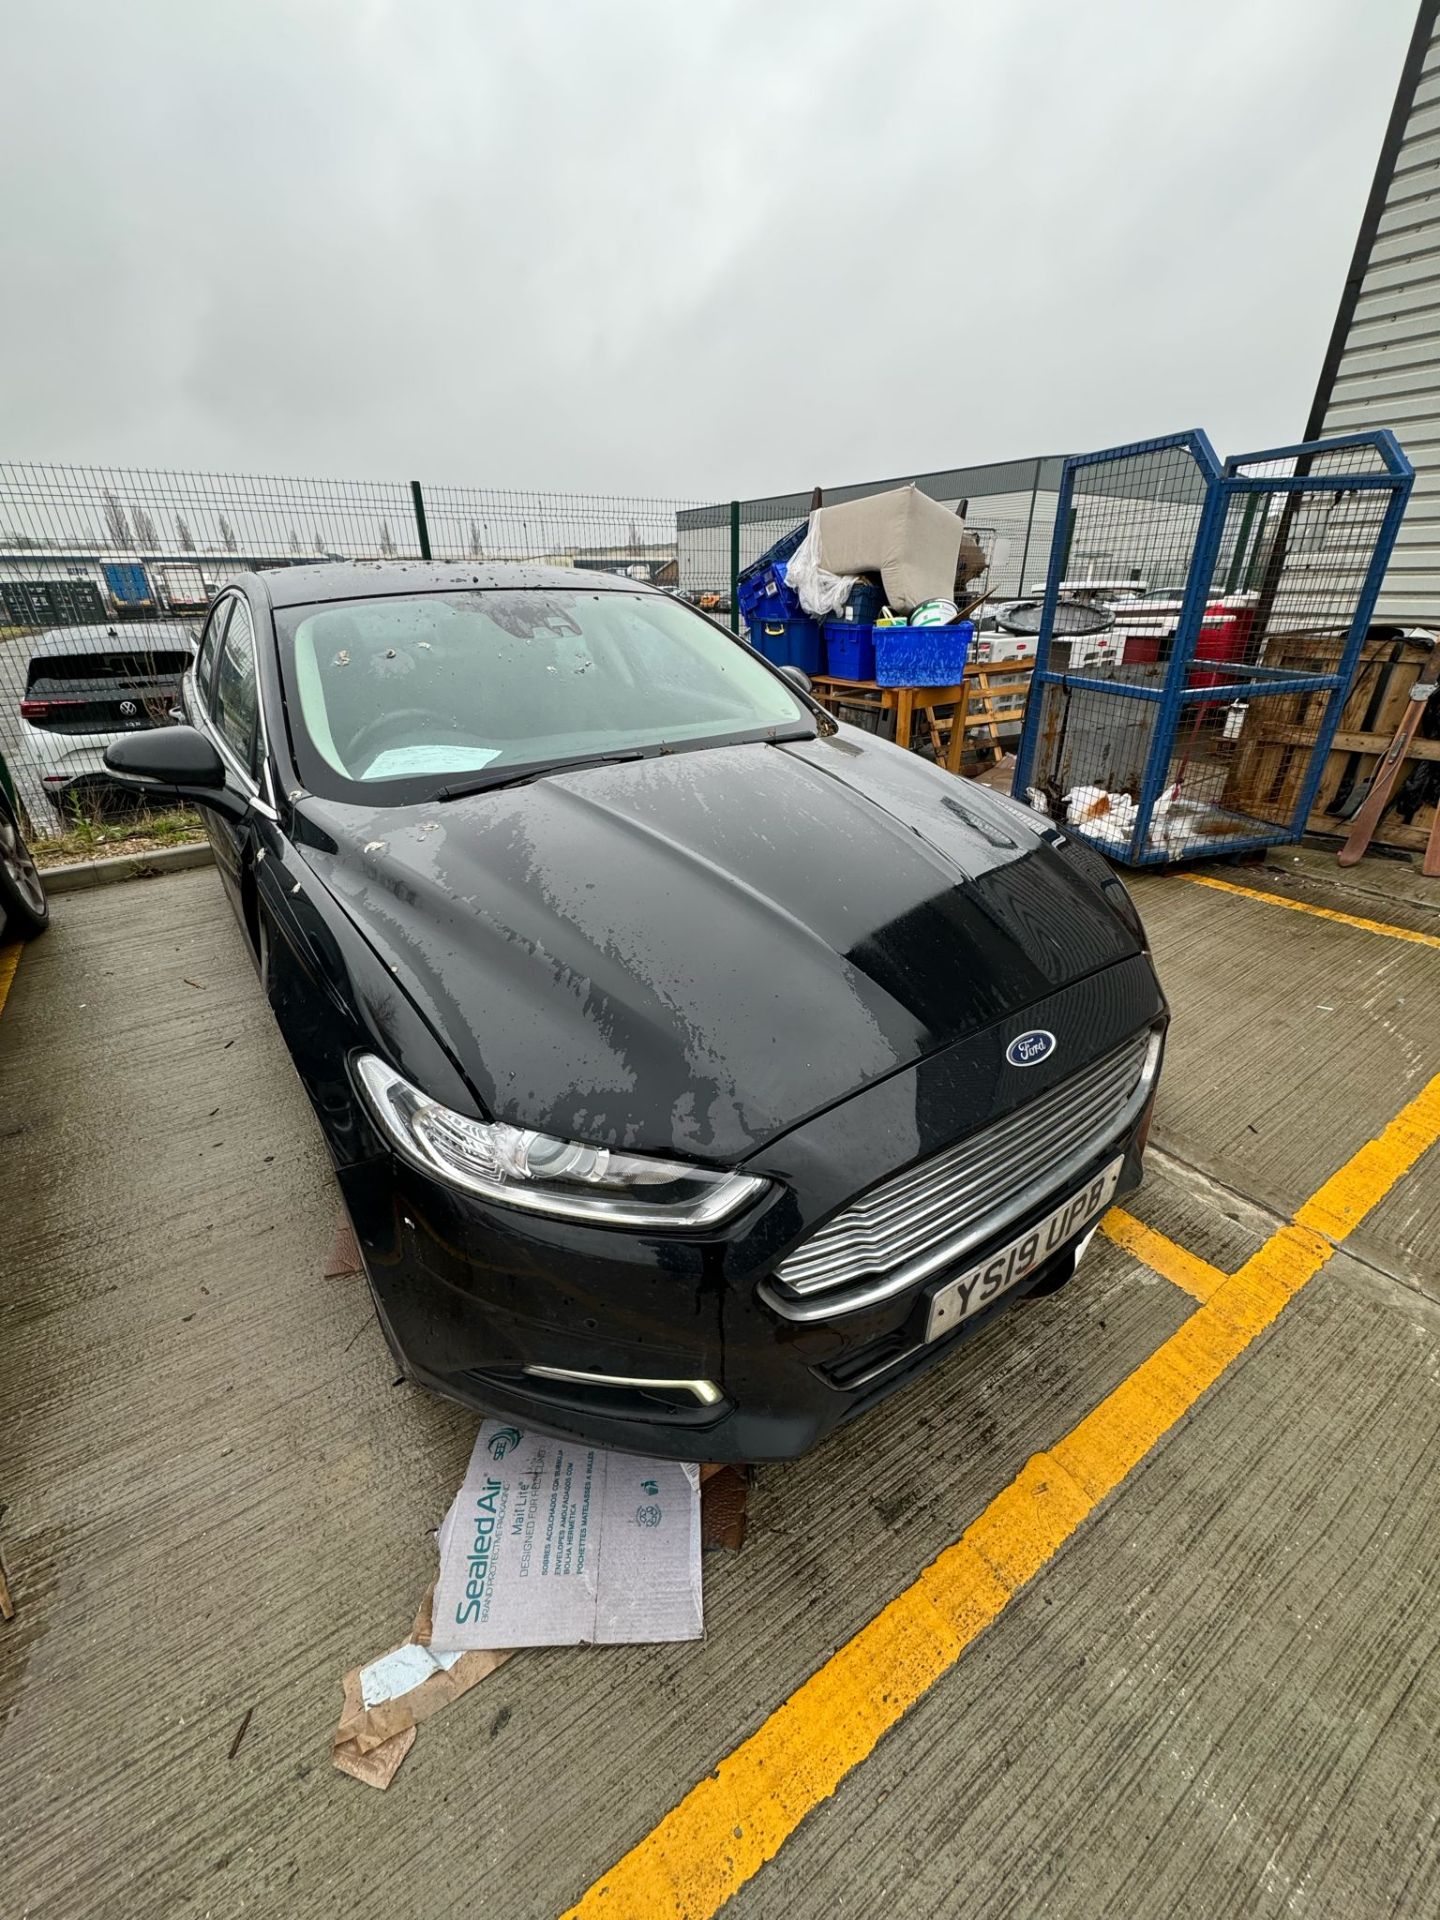 NO RESERVE - 2019, FORD Mondeo (Ex-Fleet Vehicle) - Image 7 of 19